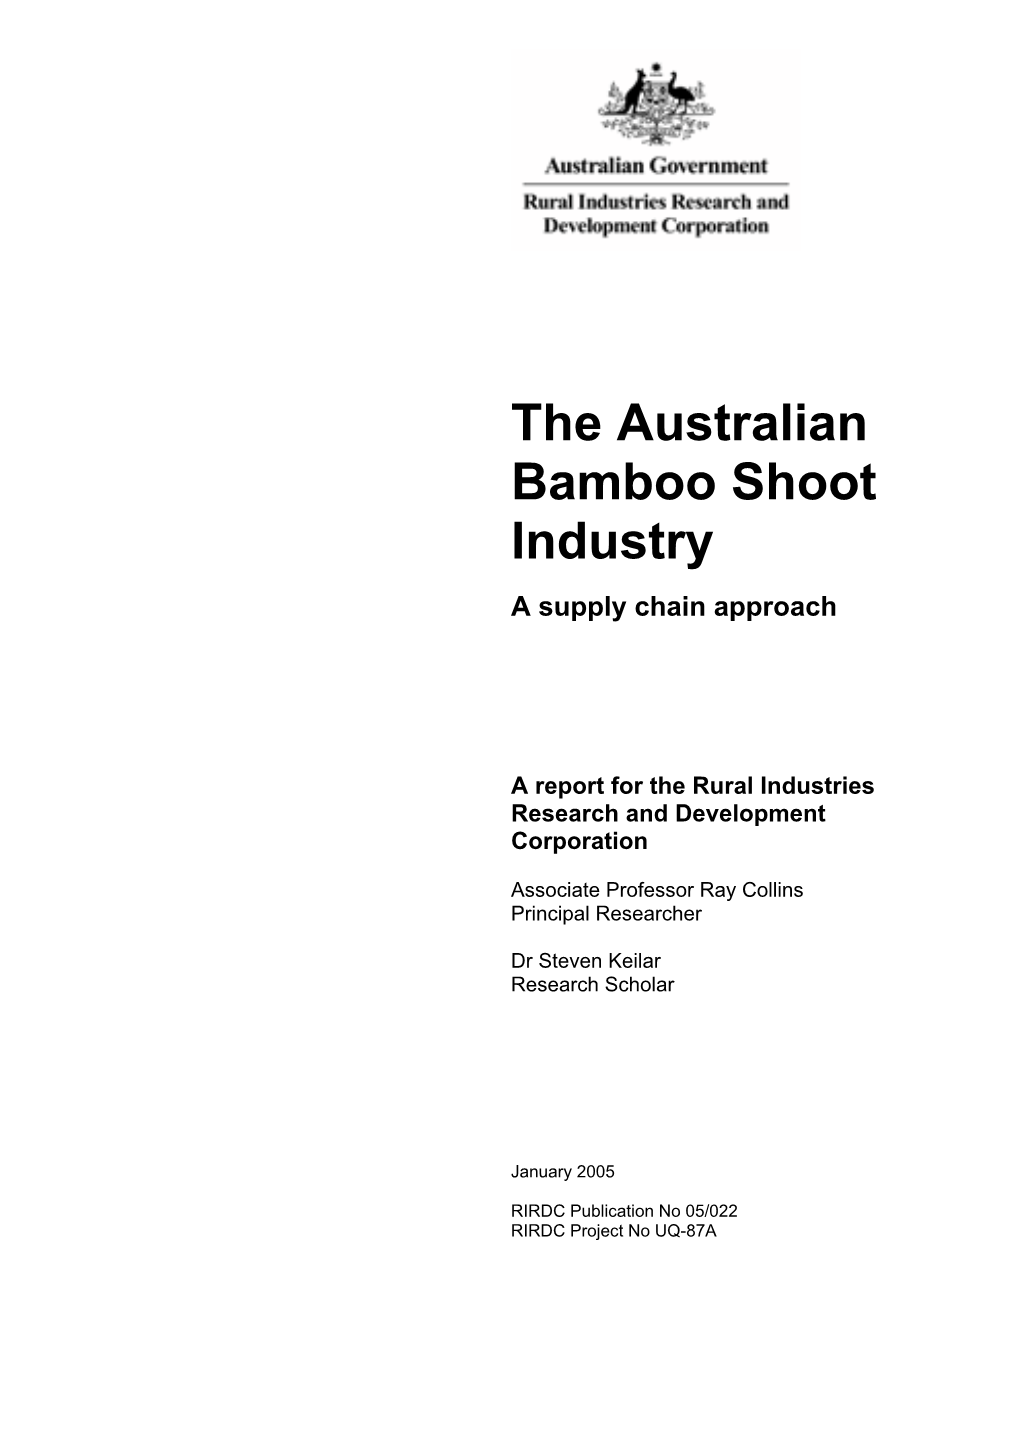 The Australian Bamboo Shoot Industry a Supply Chain Approach